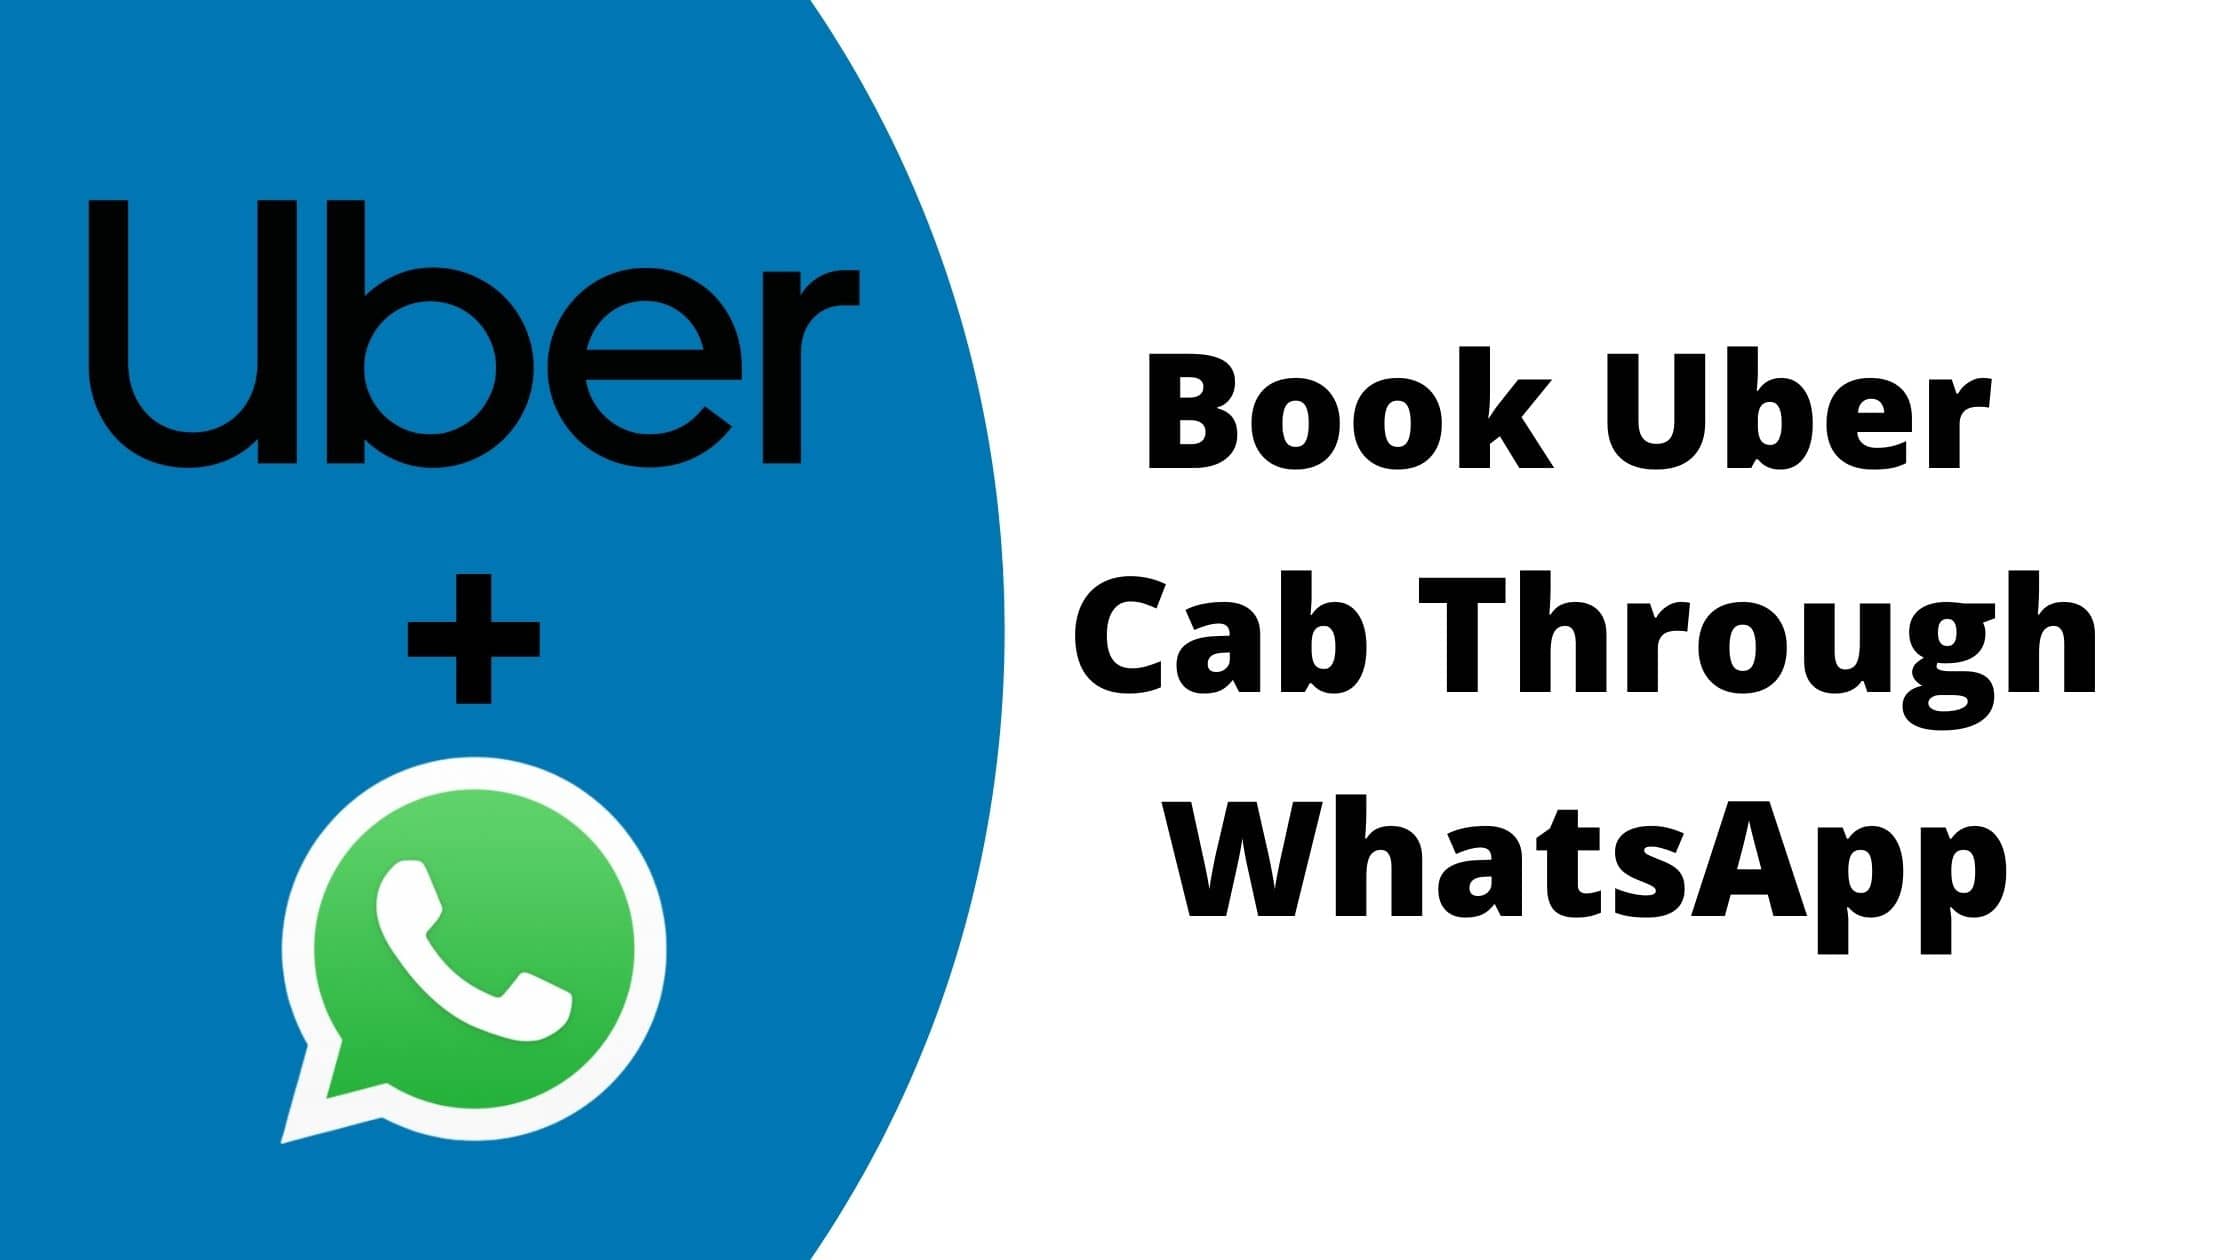 How to Book Uber Cab Through WhatsApp on your Smartphone